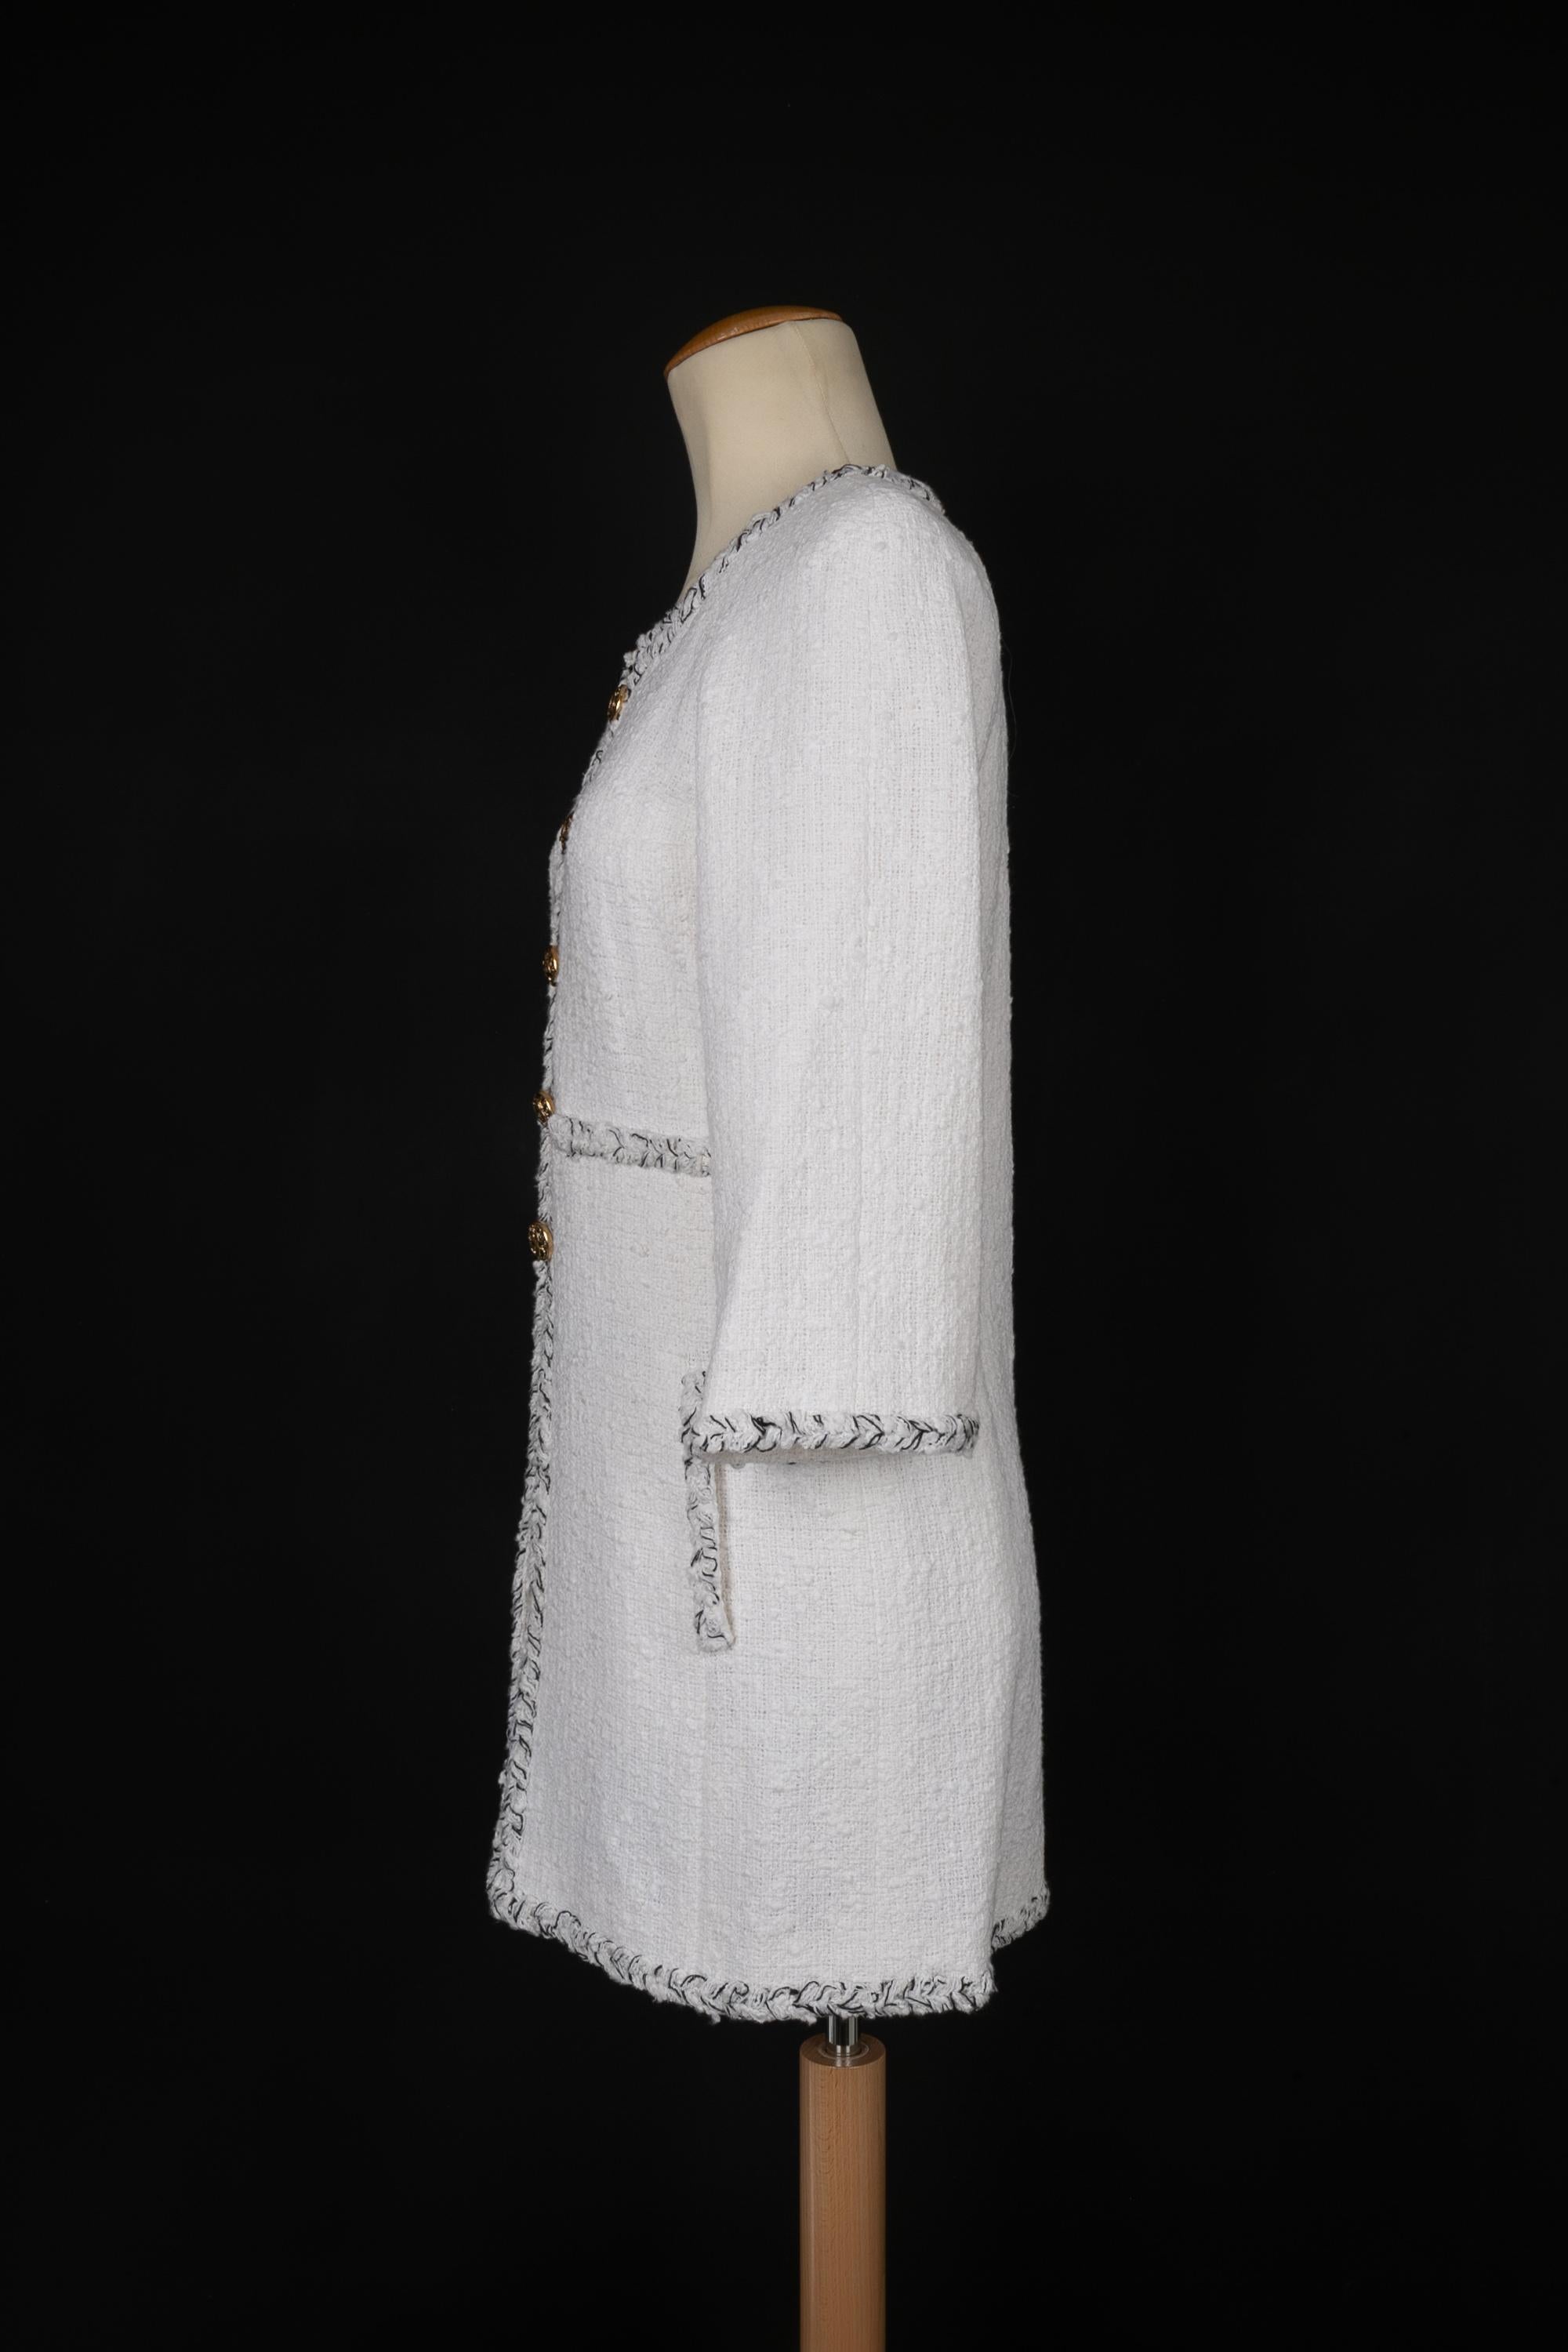 CHANEL - (Made in France) Blended cotton mid-length cardigan with a silk lining and edged with braids. 34FR size indicated. 2007 Spring-Summer Collection.

Condition:
Very good condition

Dimensions:
Shoulder width: 37 cm - Chest: 42 cm - Sleeve